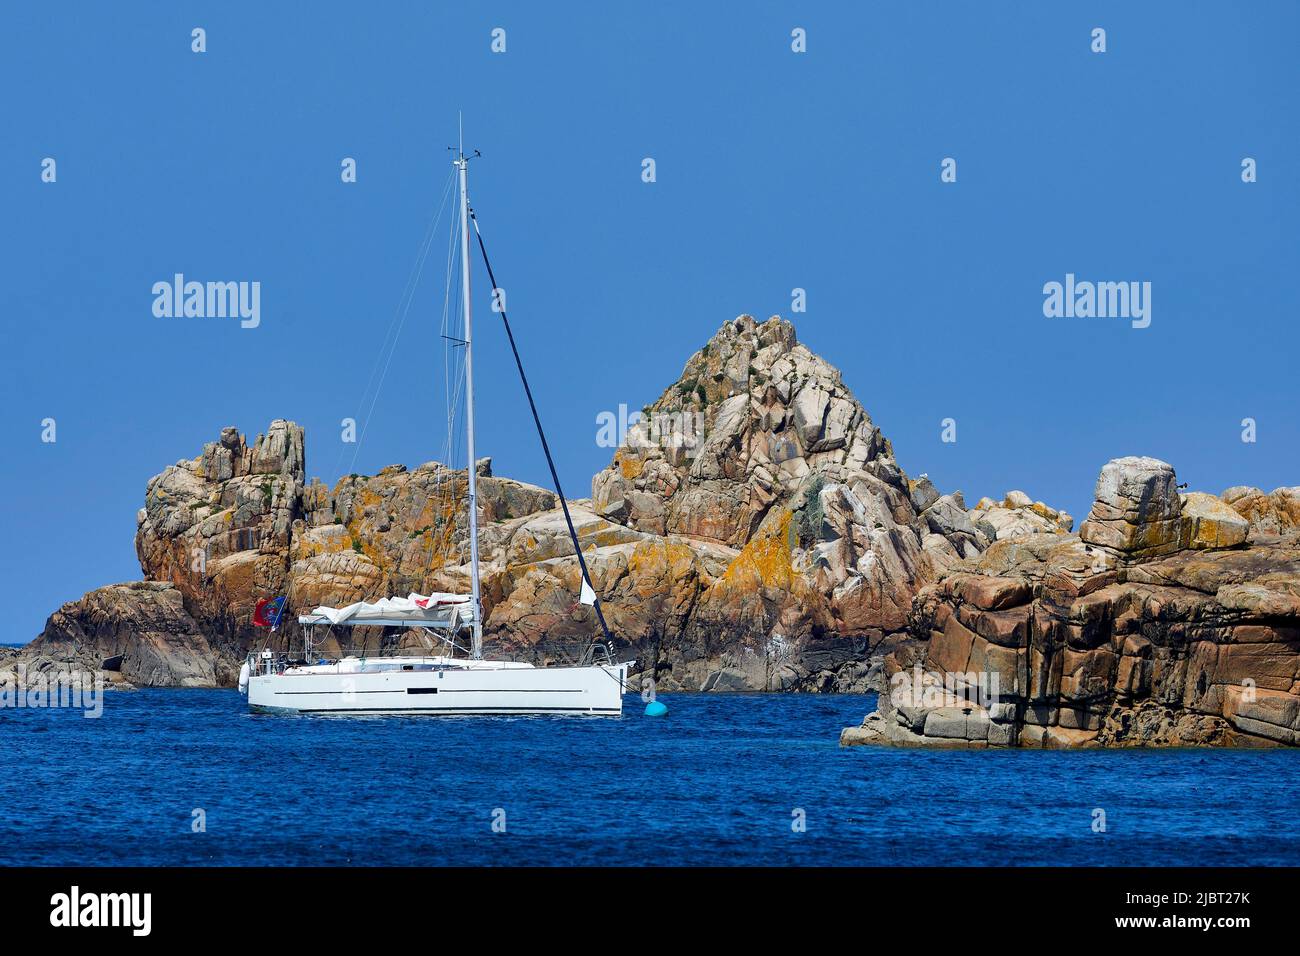 France, Cotes d'Armor, Ile de Bréhat (Brehat island), sailing boat at anchor in front of the Corderie cove Stock Photo